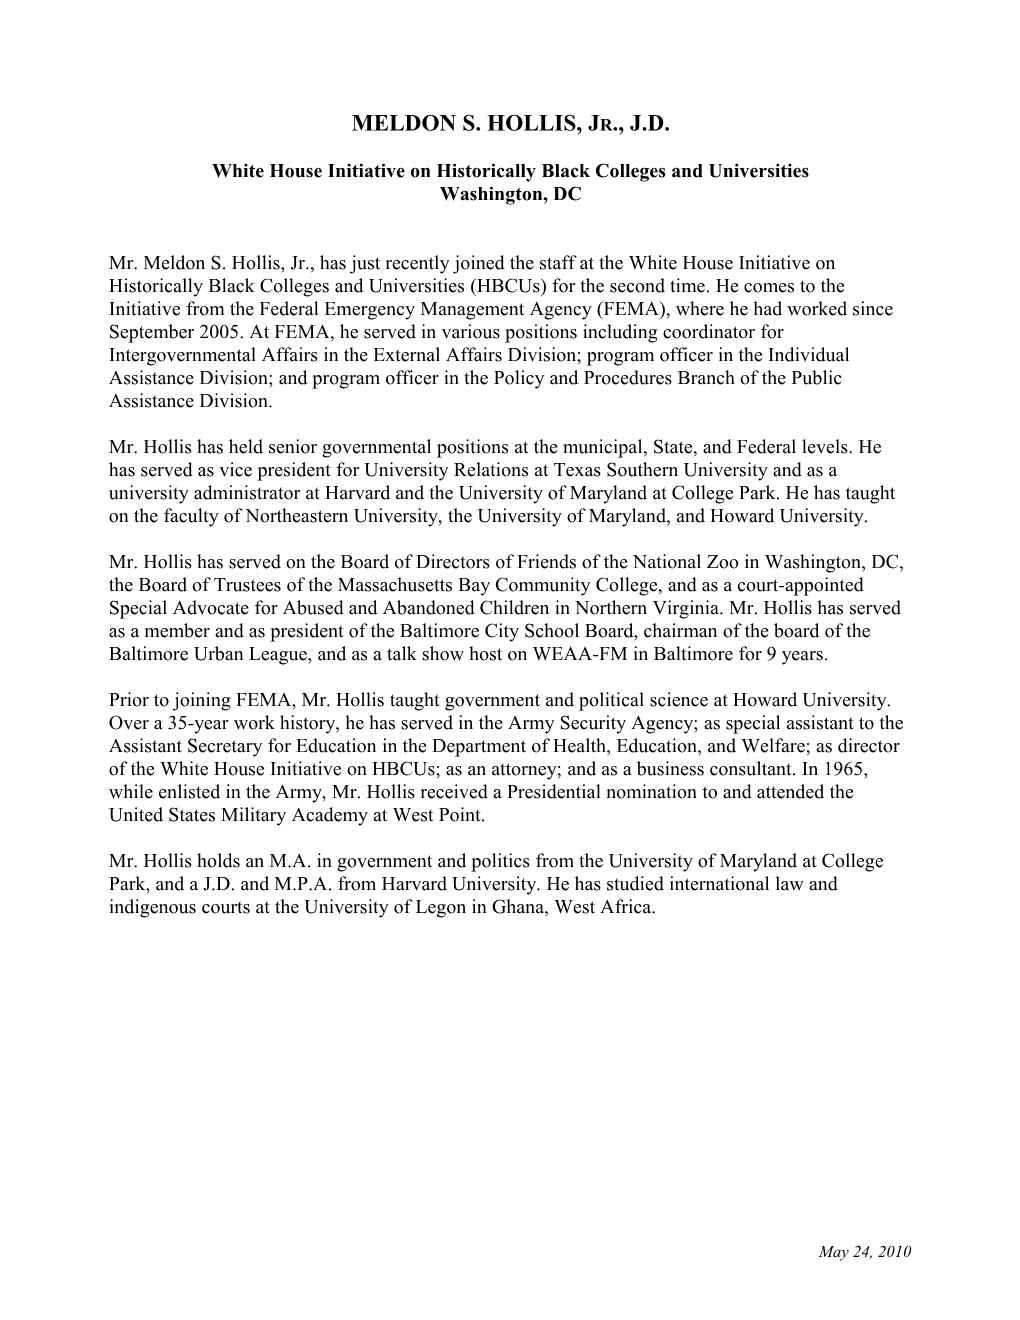 White House Initiative on Historically Black Colleges and Universities